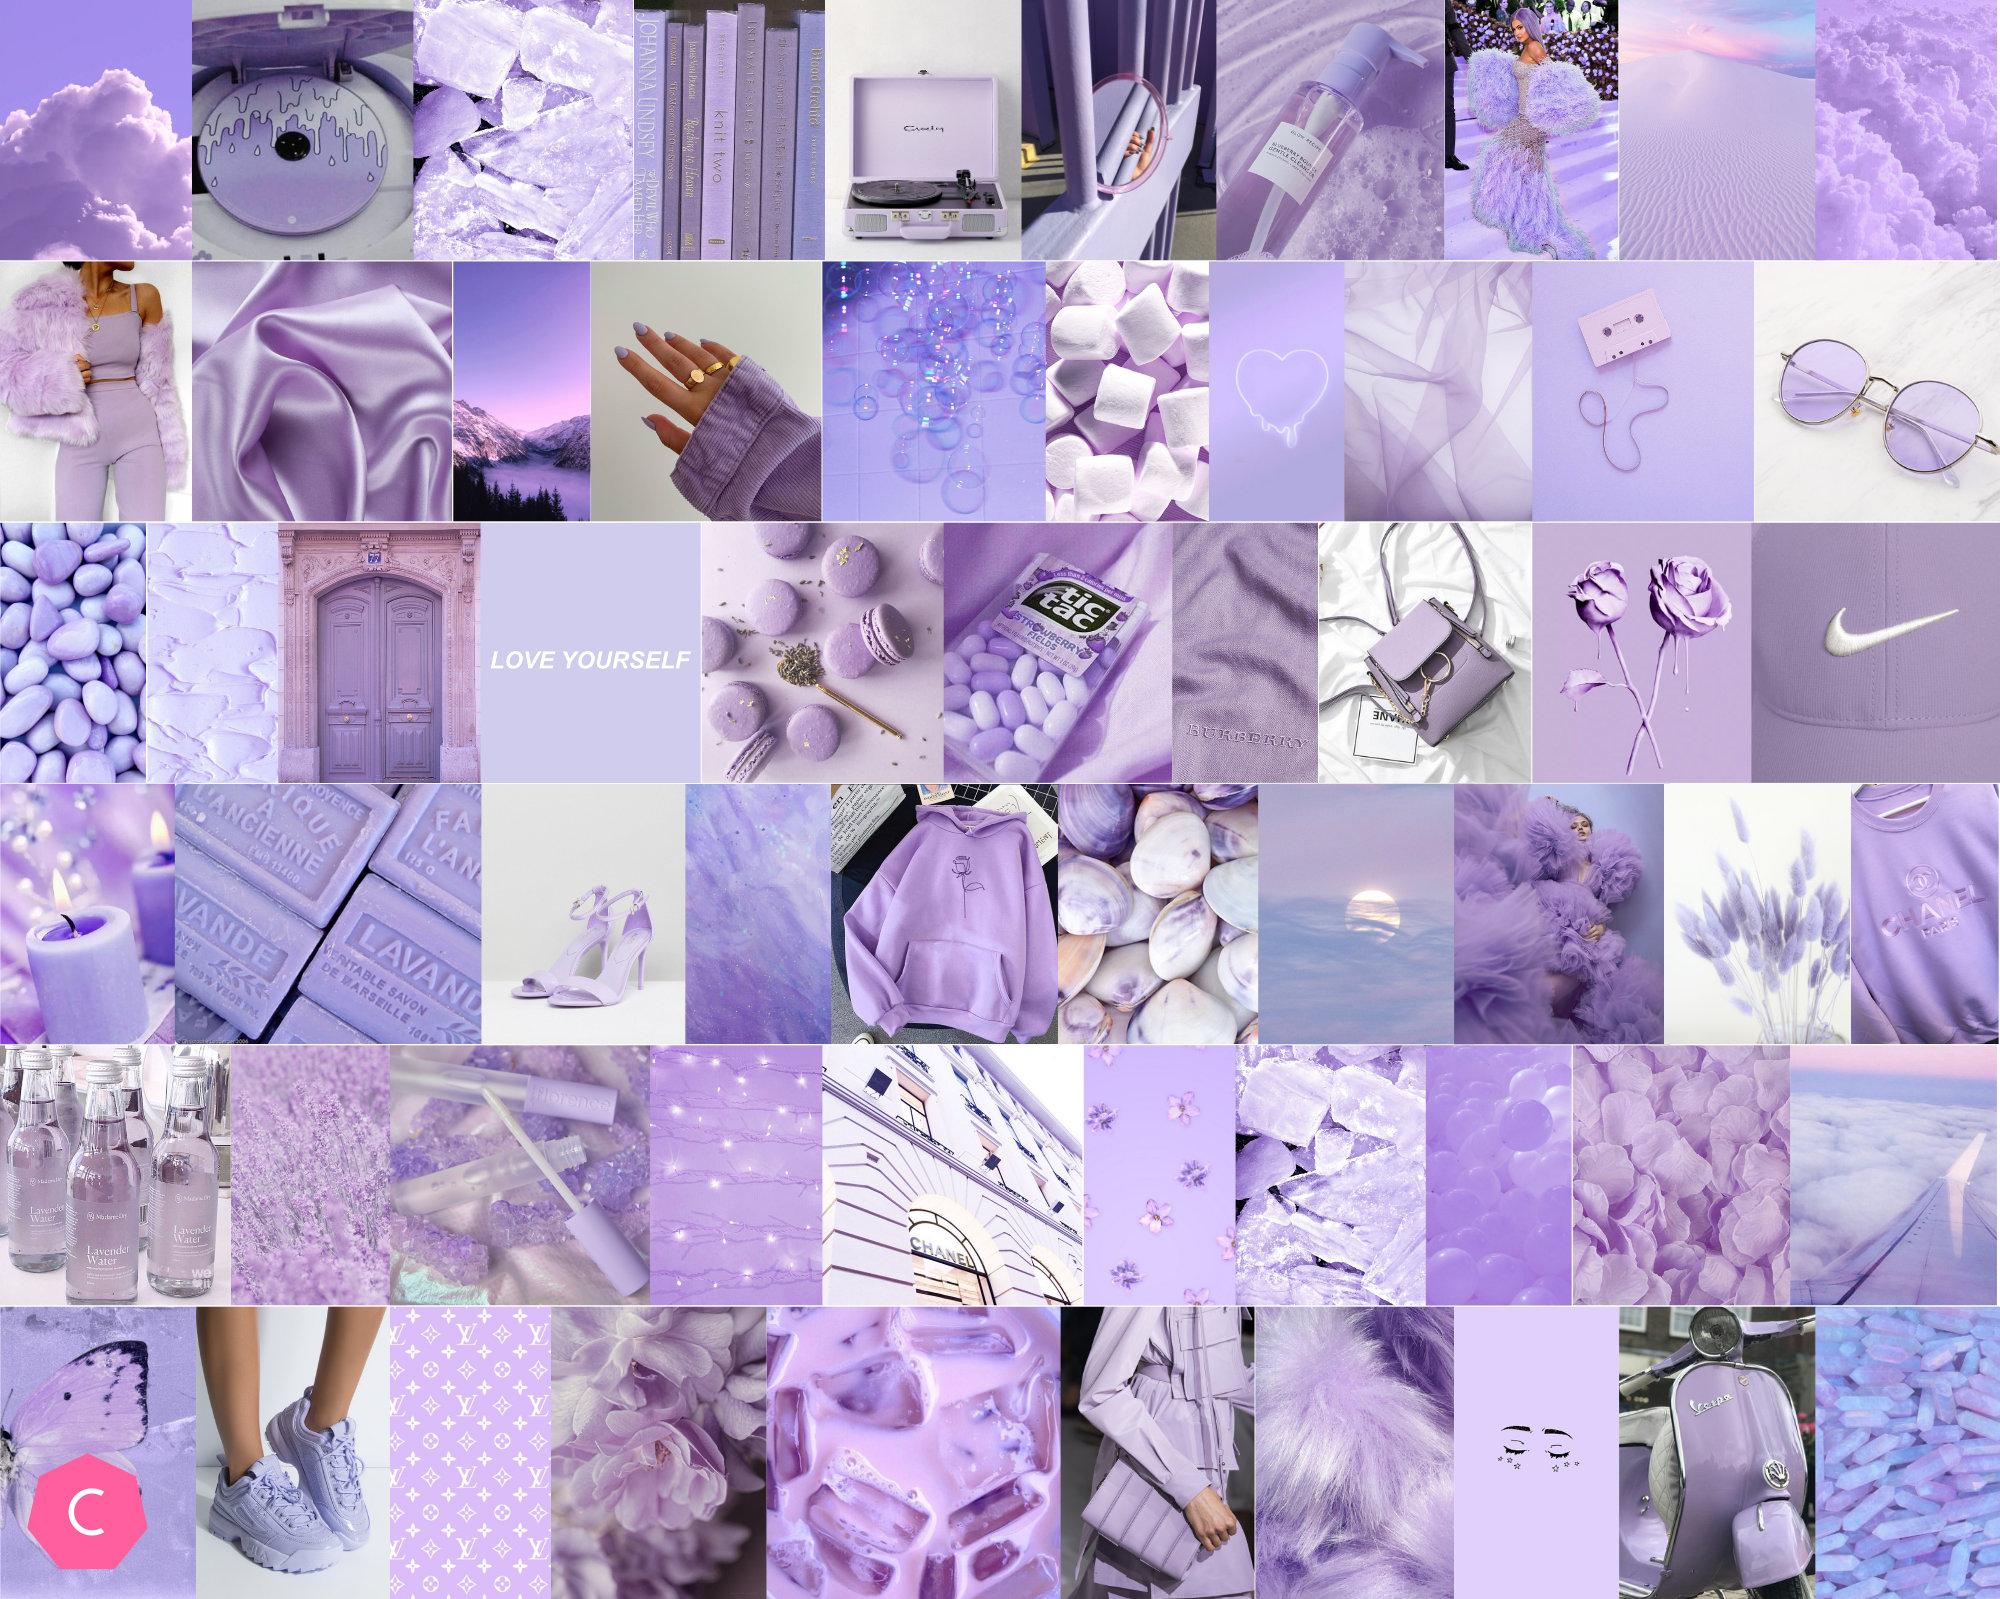 Boujee Lavender Aesthetic Wall Collage Kit digital Download   Etsy